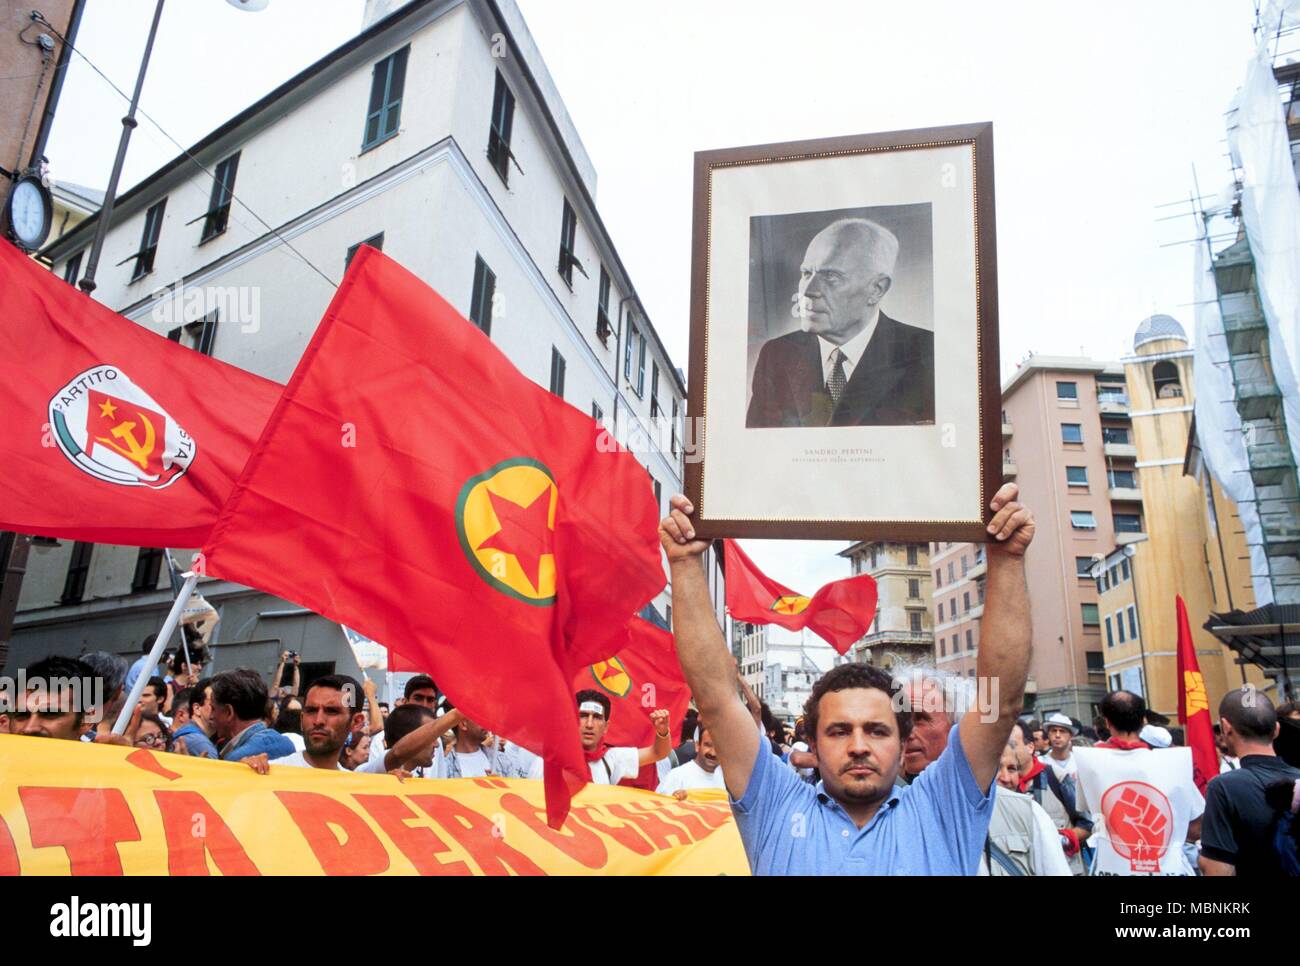 protest against the international G8 summit in Genoa (Italy), July 2001, Kurdish flag and portrait of Pertini President of the Republic Stock Photo